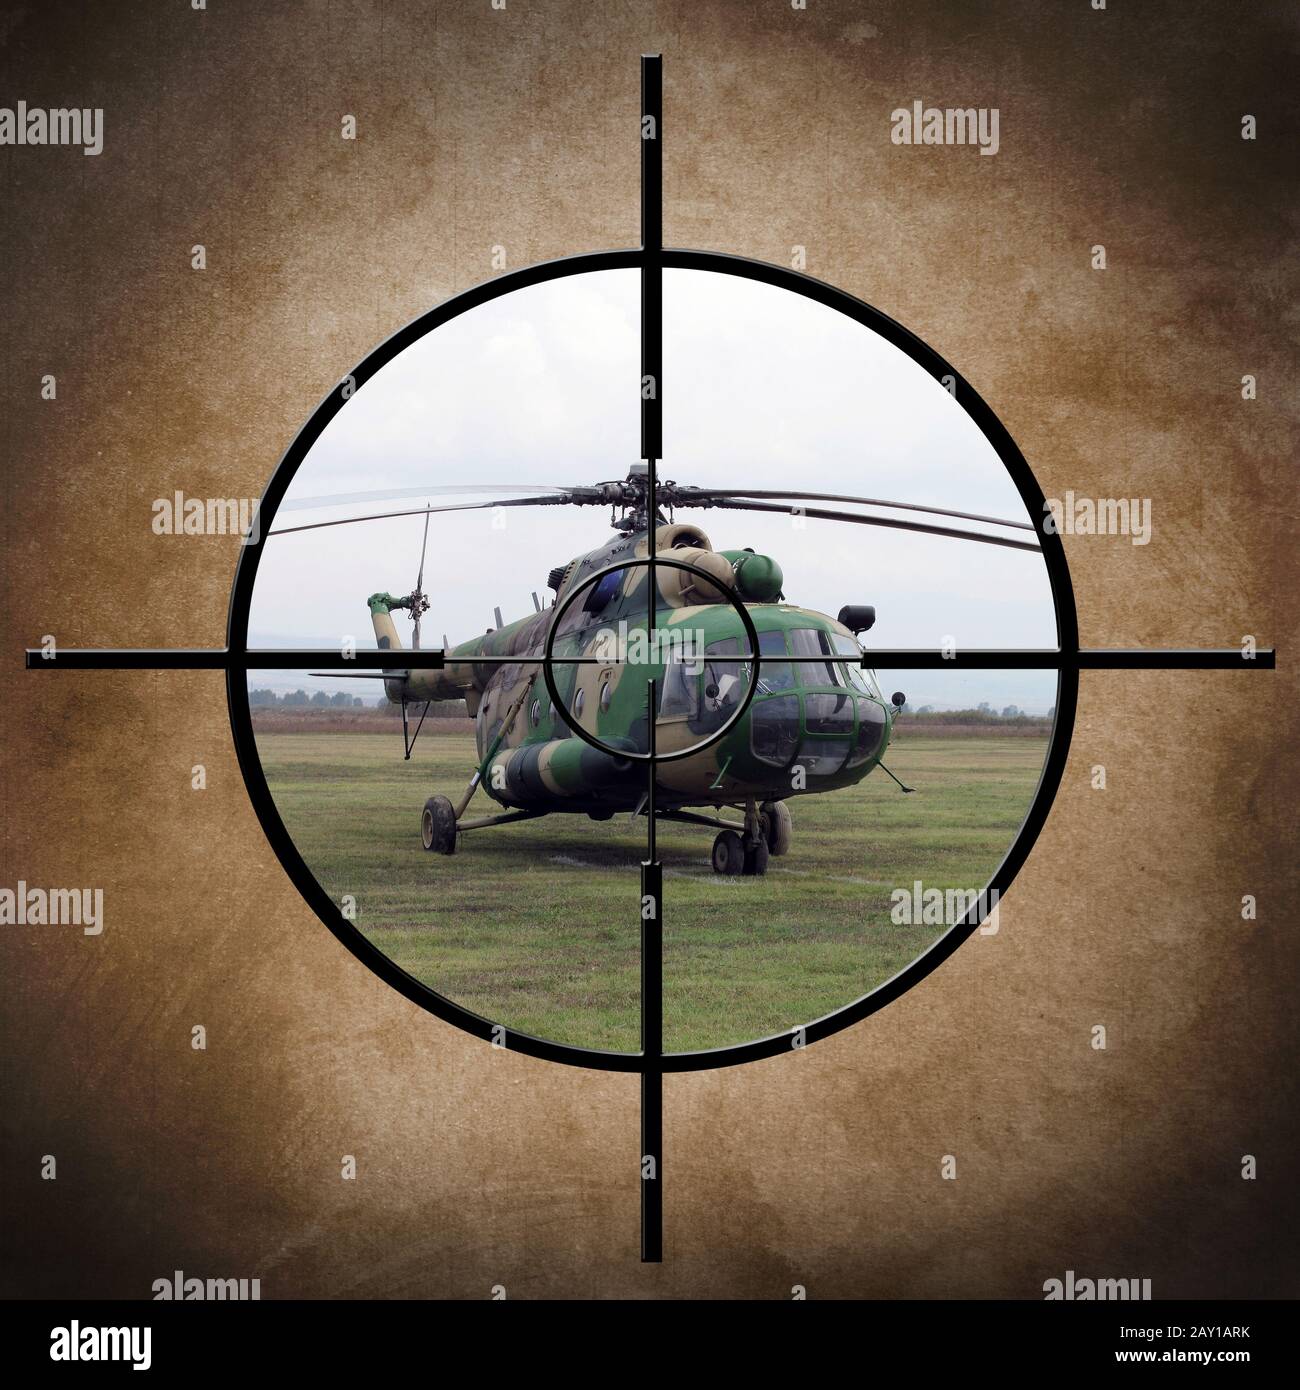 Target on helicopter Stock Photo